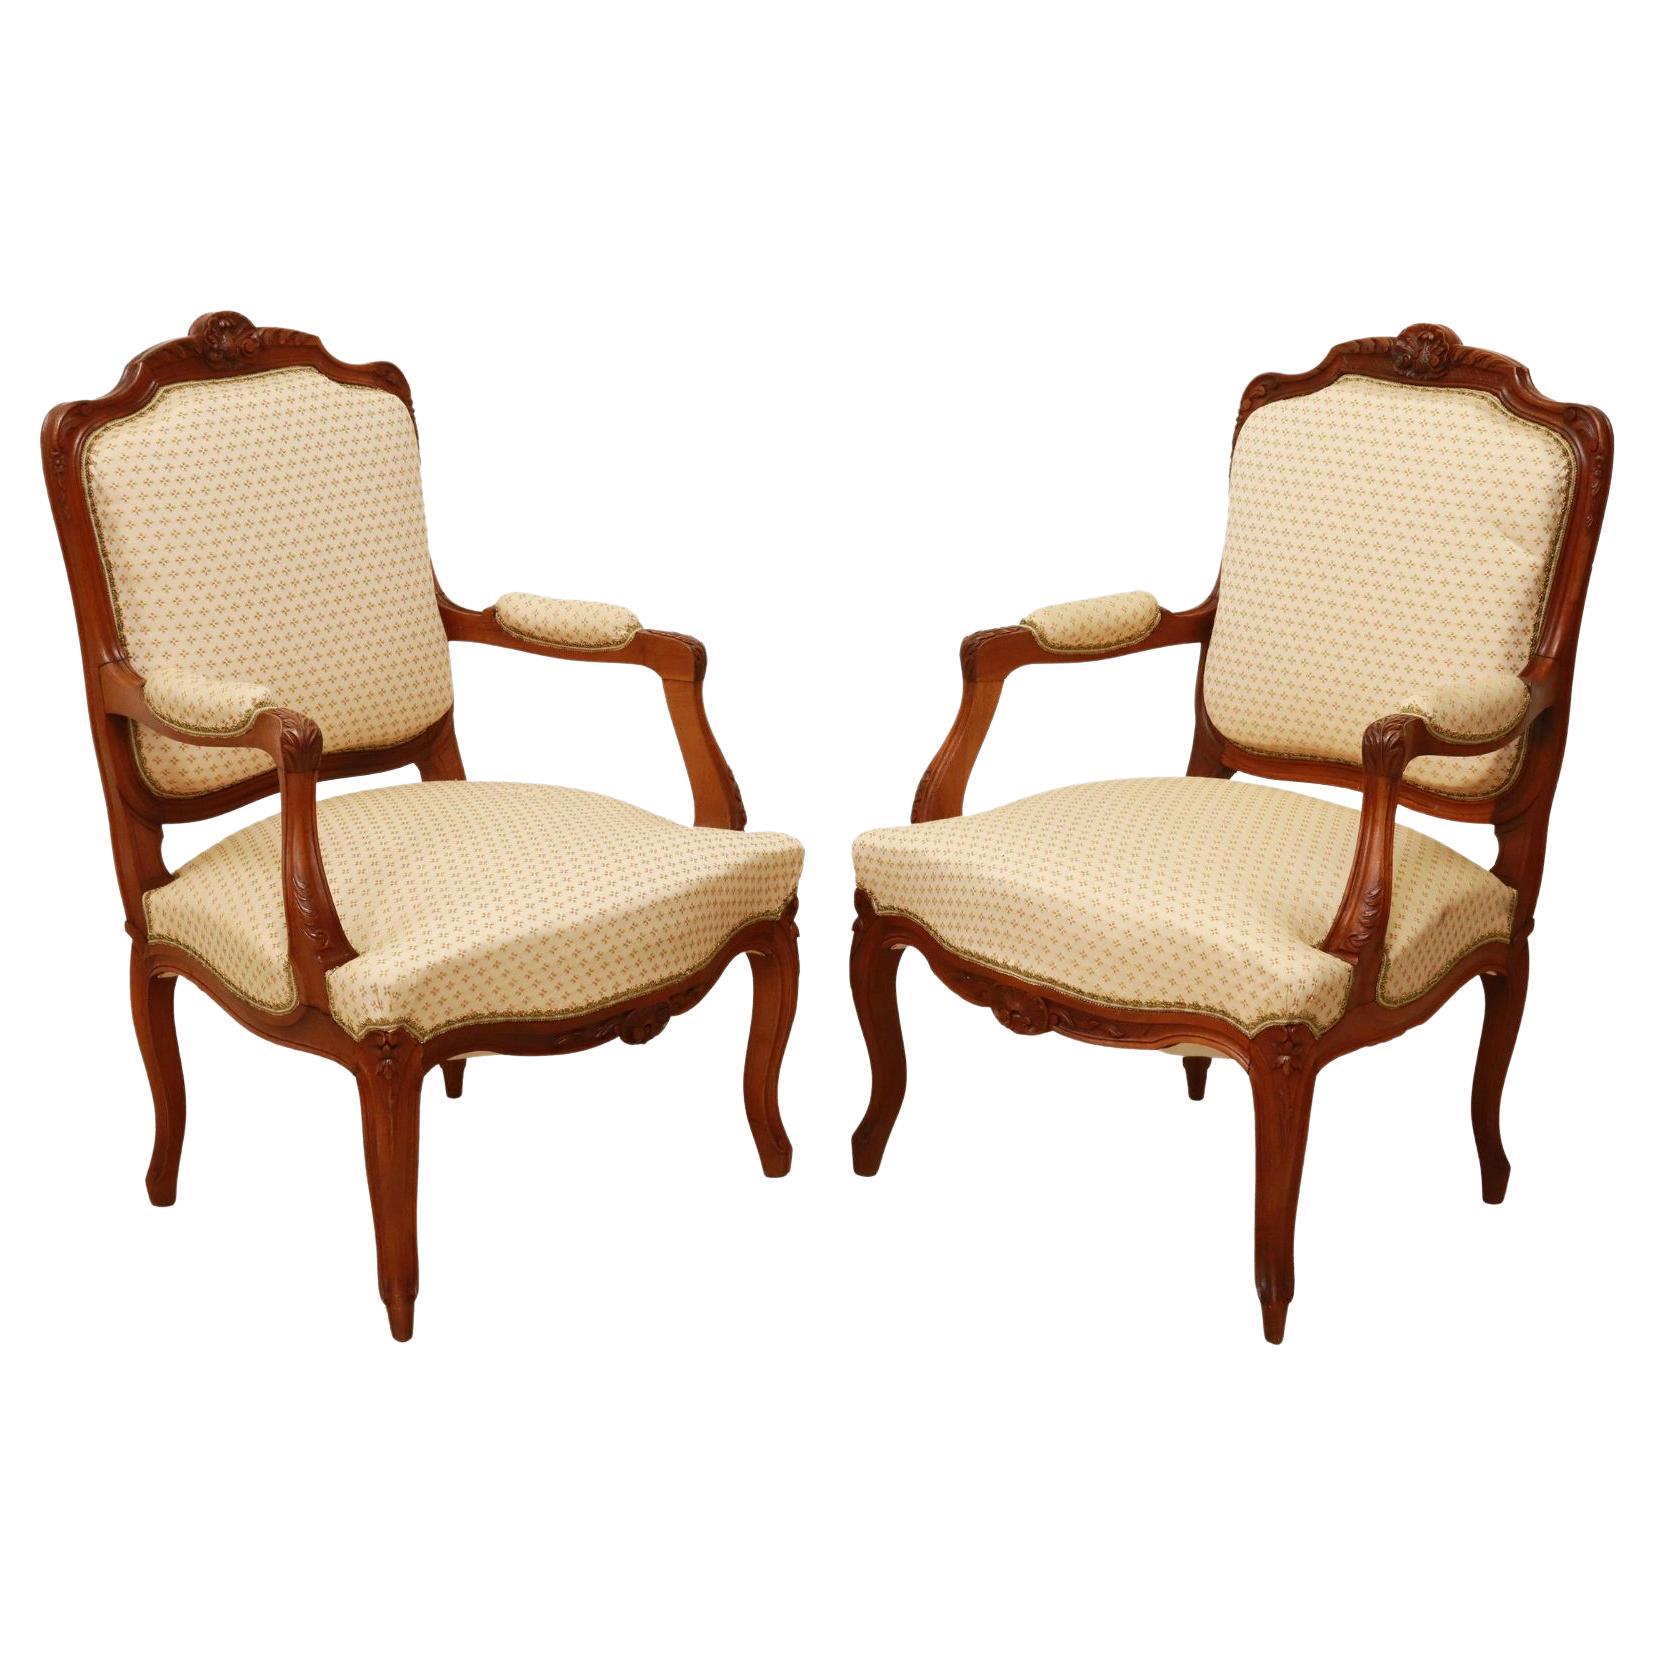 French Louis XV Style Upholstered Fauteuils Arm Chairs, a Pair For Sale